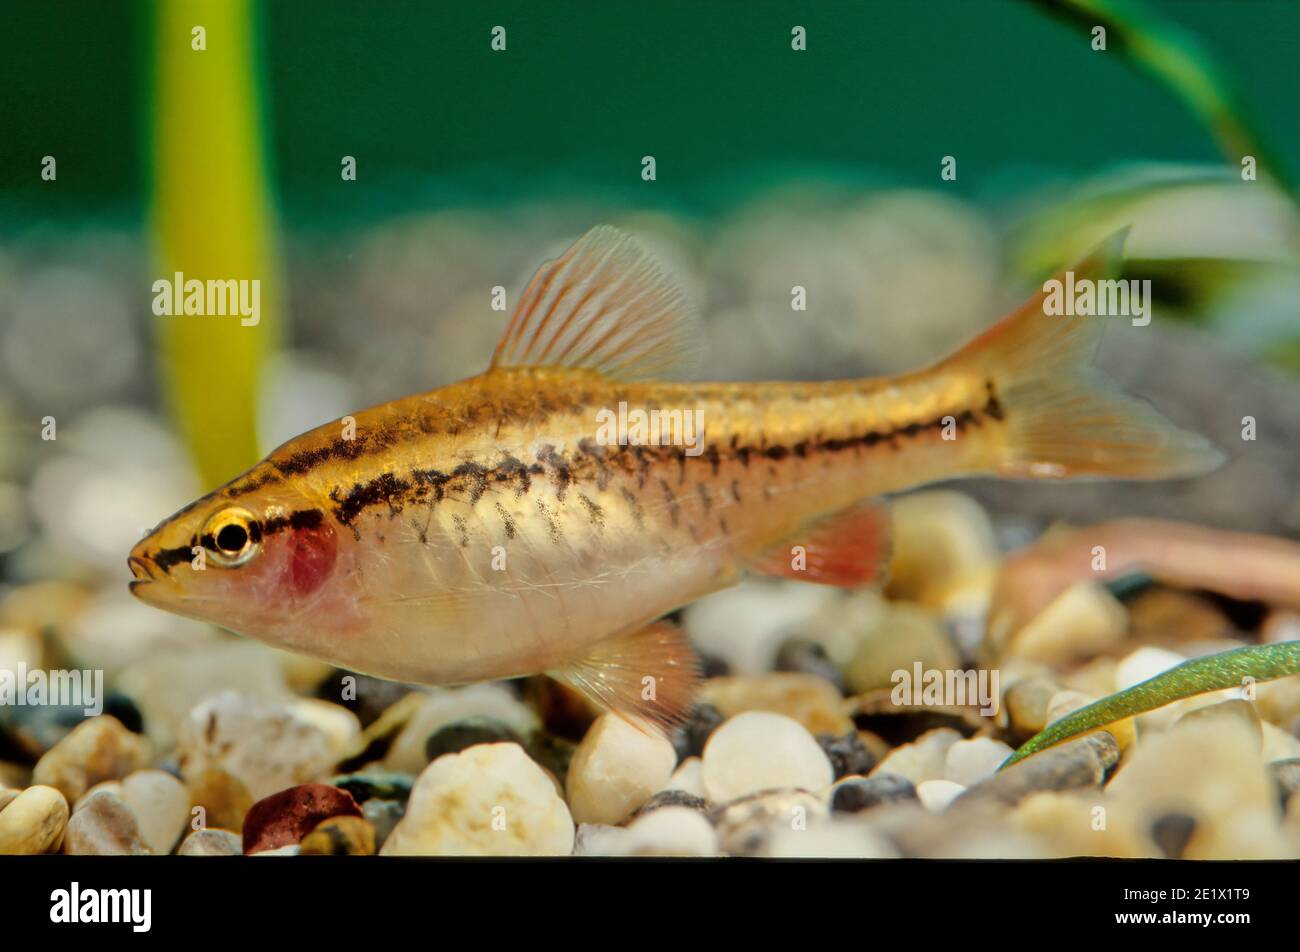 The cherry barb (Puntius titteya) is a tropical freshwater fish belonging to the family Cyprinidae. It is native to Sri Lanka, and introduced populati Stock Photo